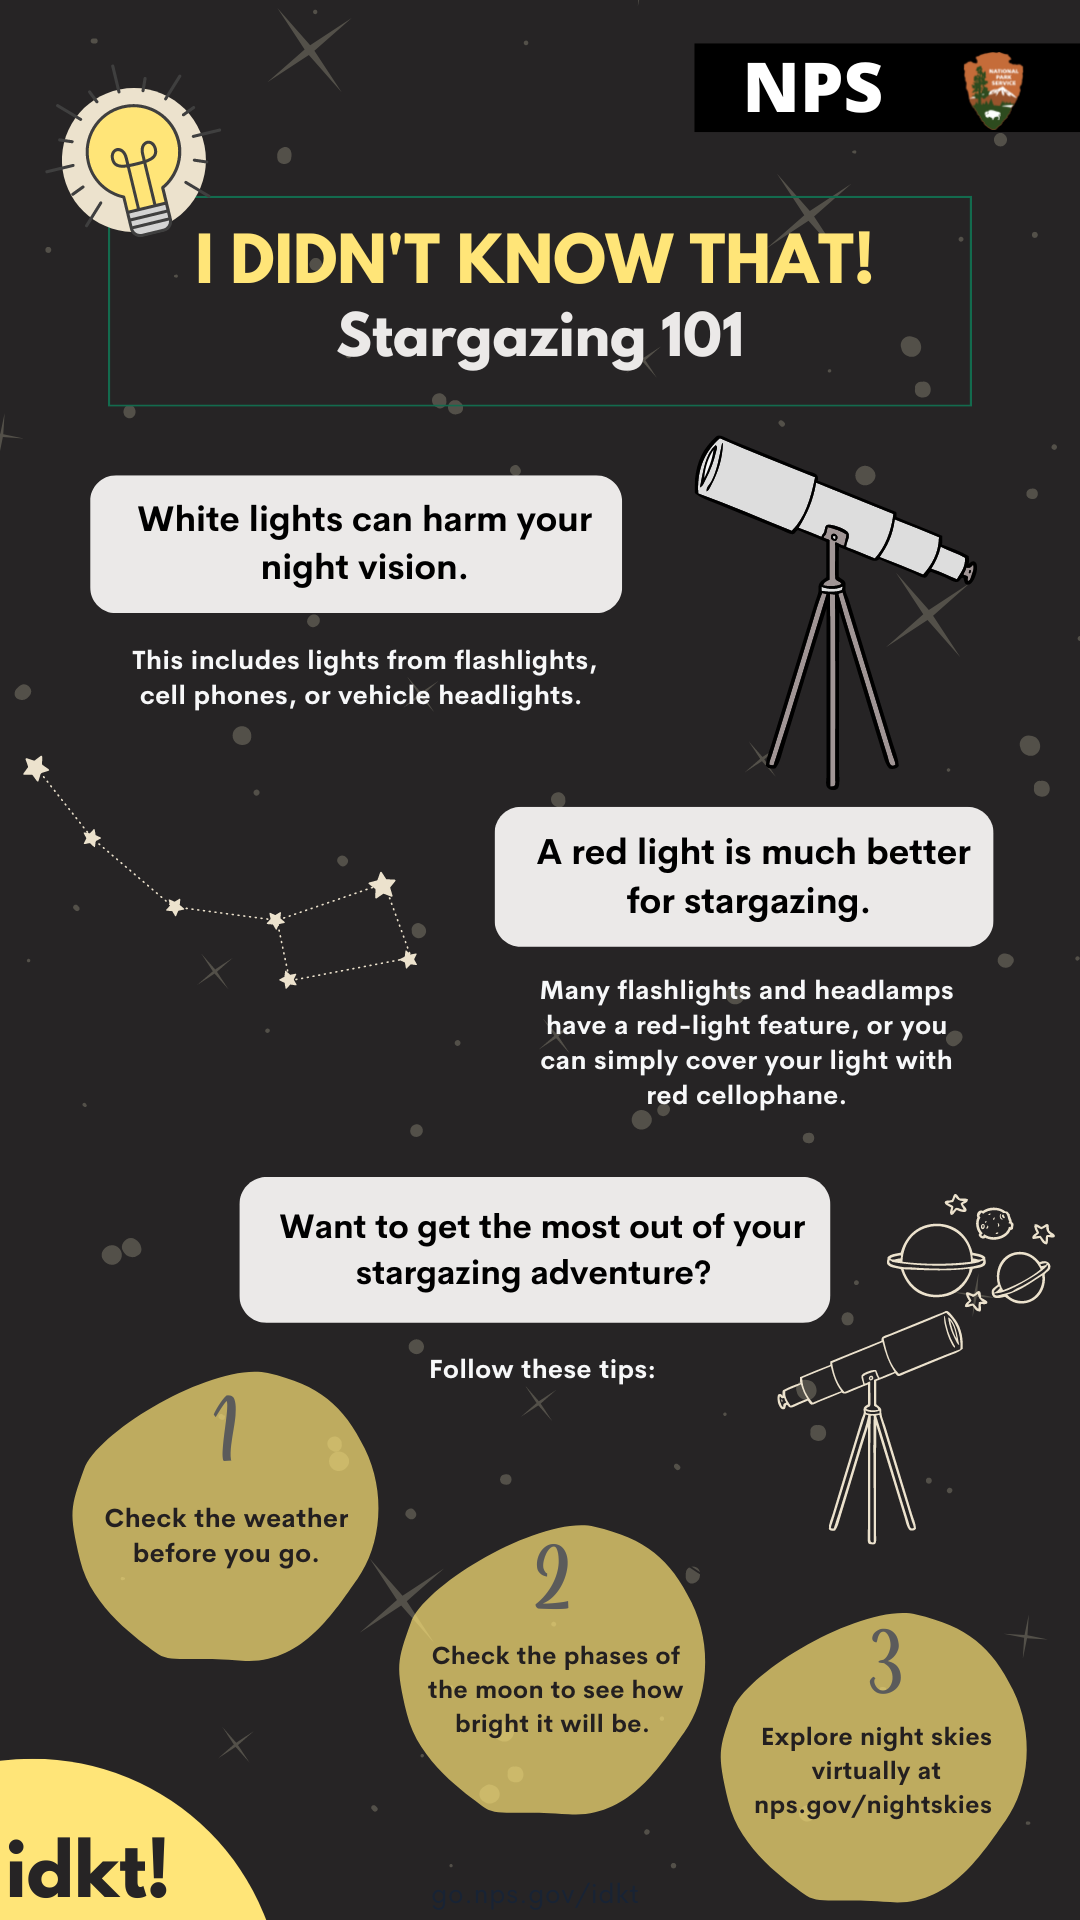 an infographic with stargazing tips. Full text description available next to image.